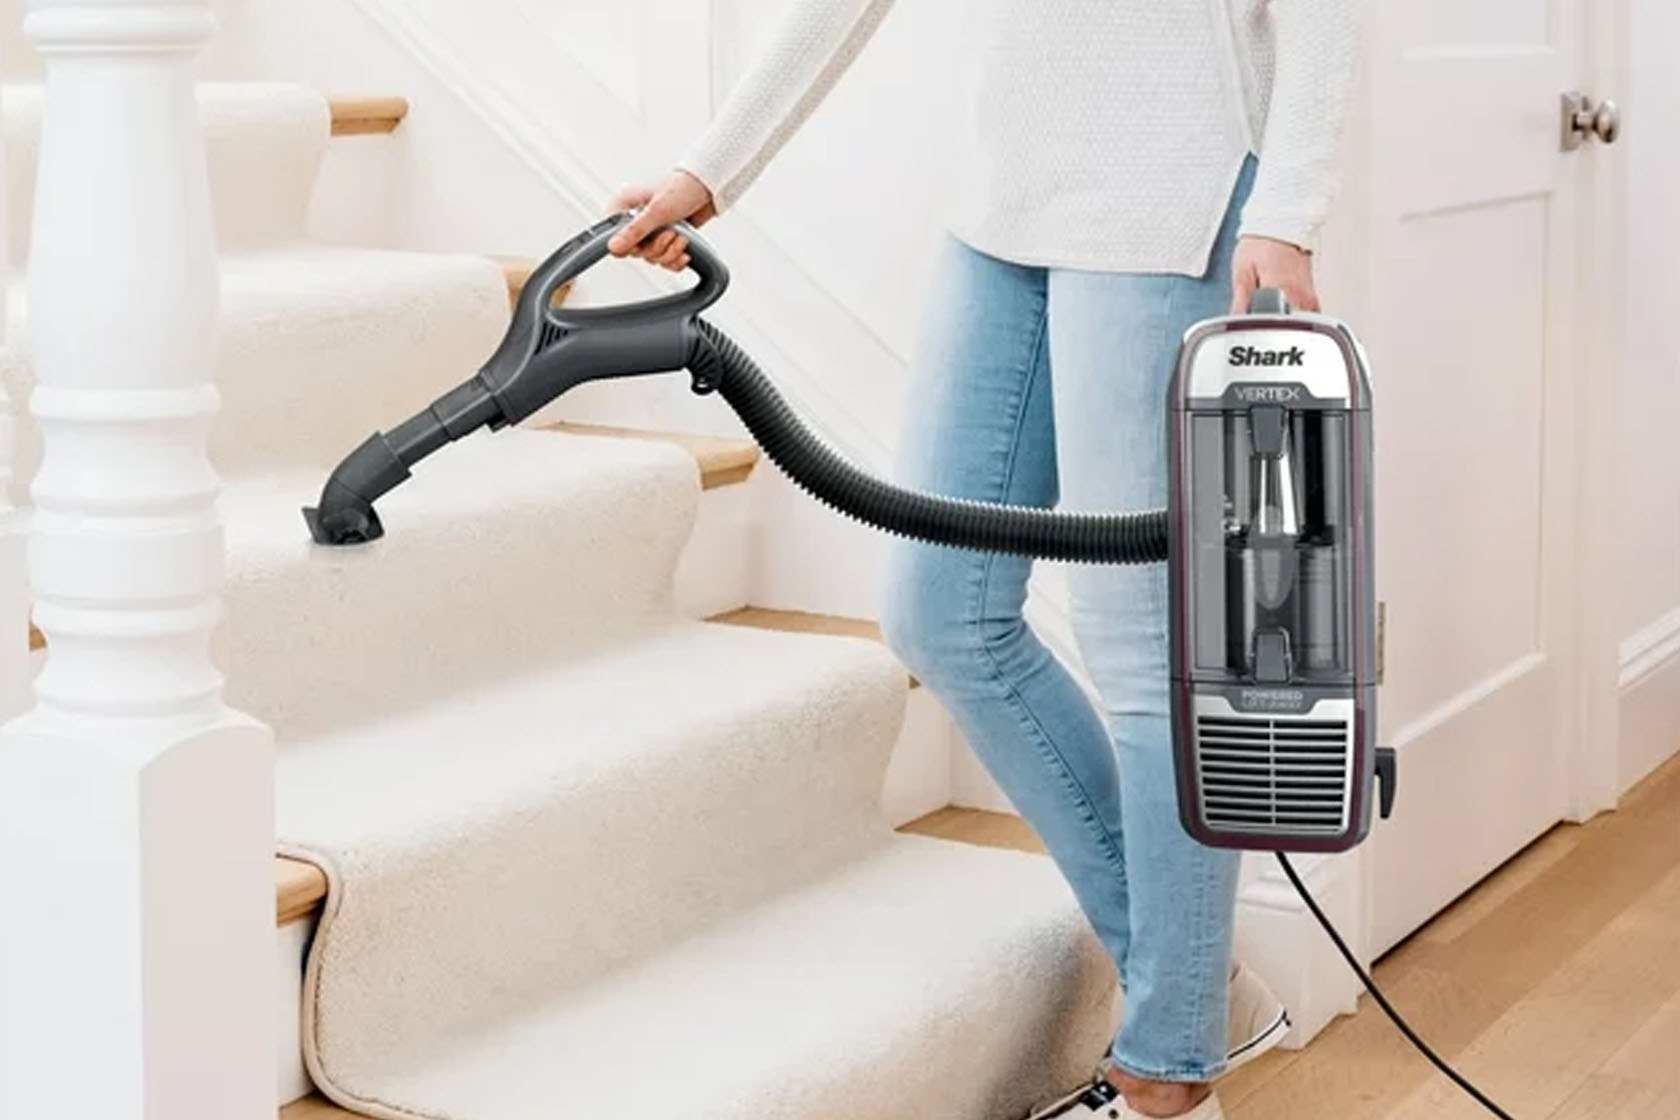 This top-rated Shark vacuum is over $150 off at Walmart